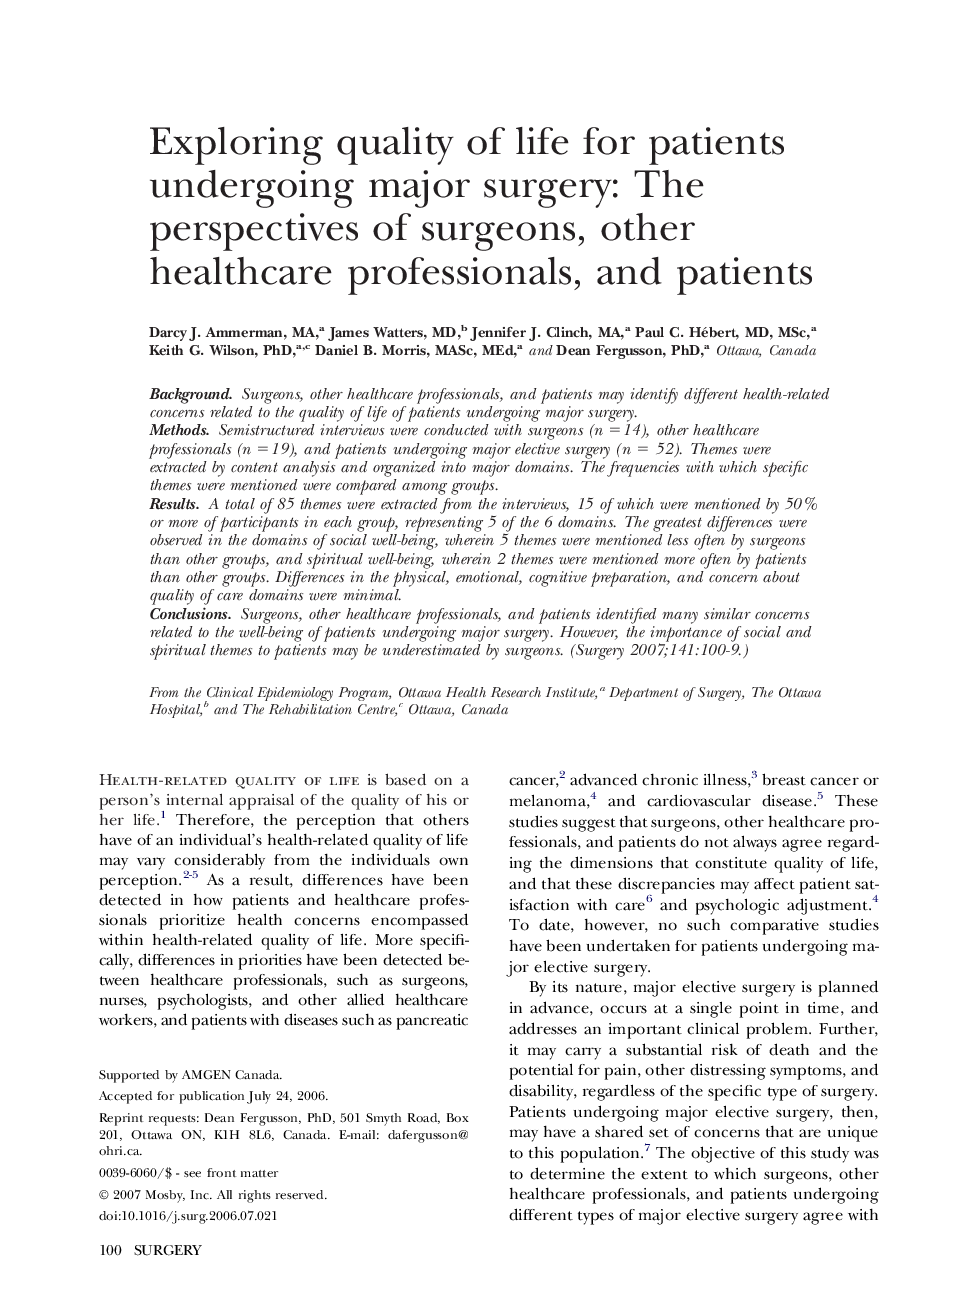 Exploring quality of life for patients undergoing major surgery: The perspectives of surgeons, other healthcare professionals, and patients 